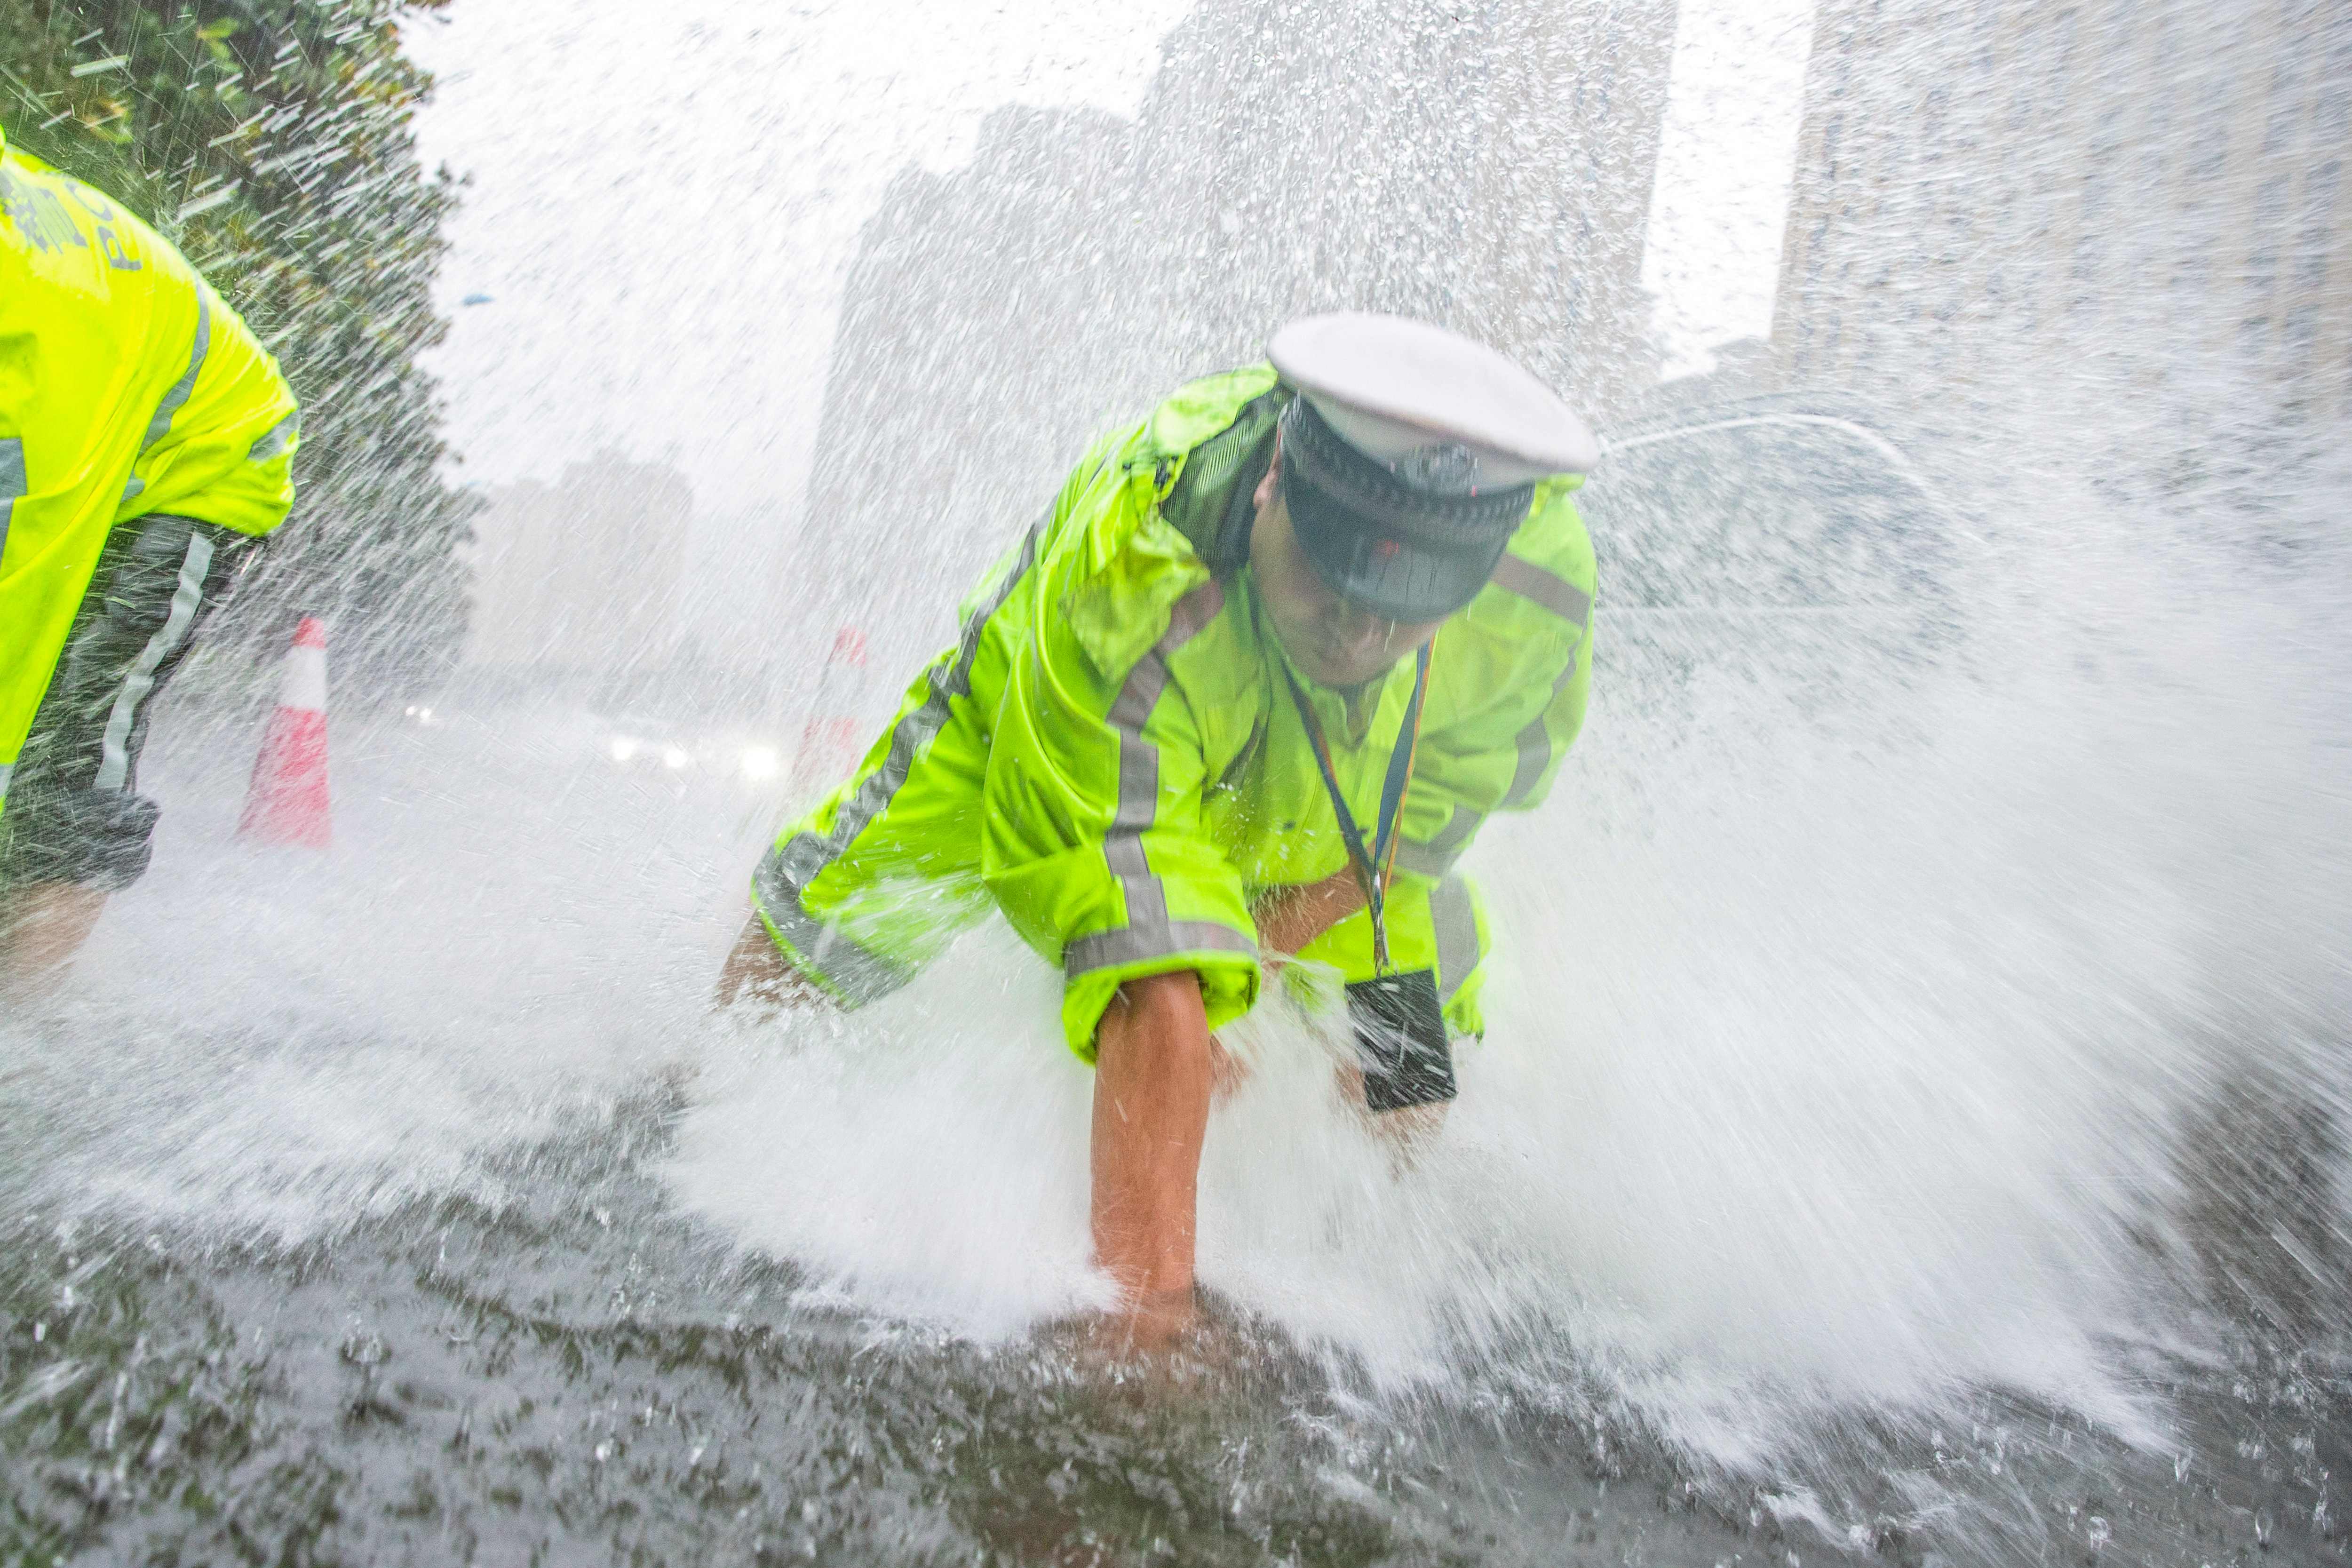 A traffic police officer drains water on a street during a downpour in Nantong, in China’s eastern Jiangsu province